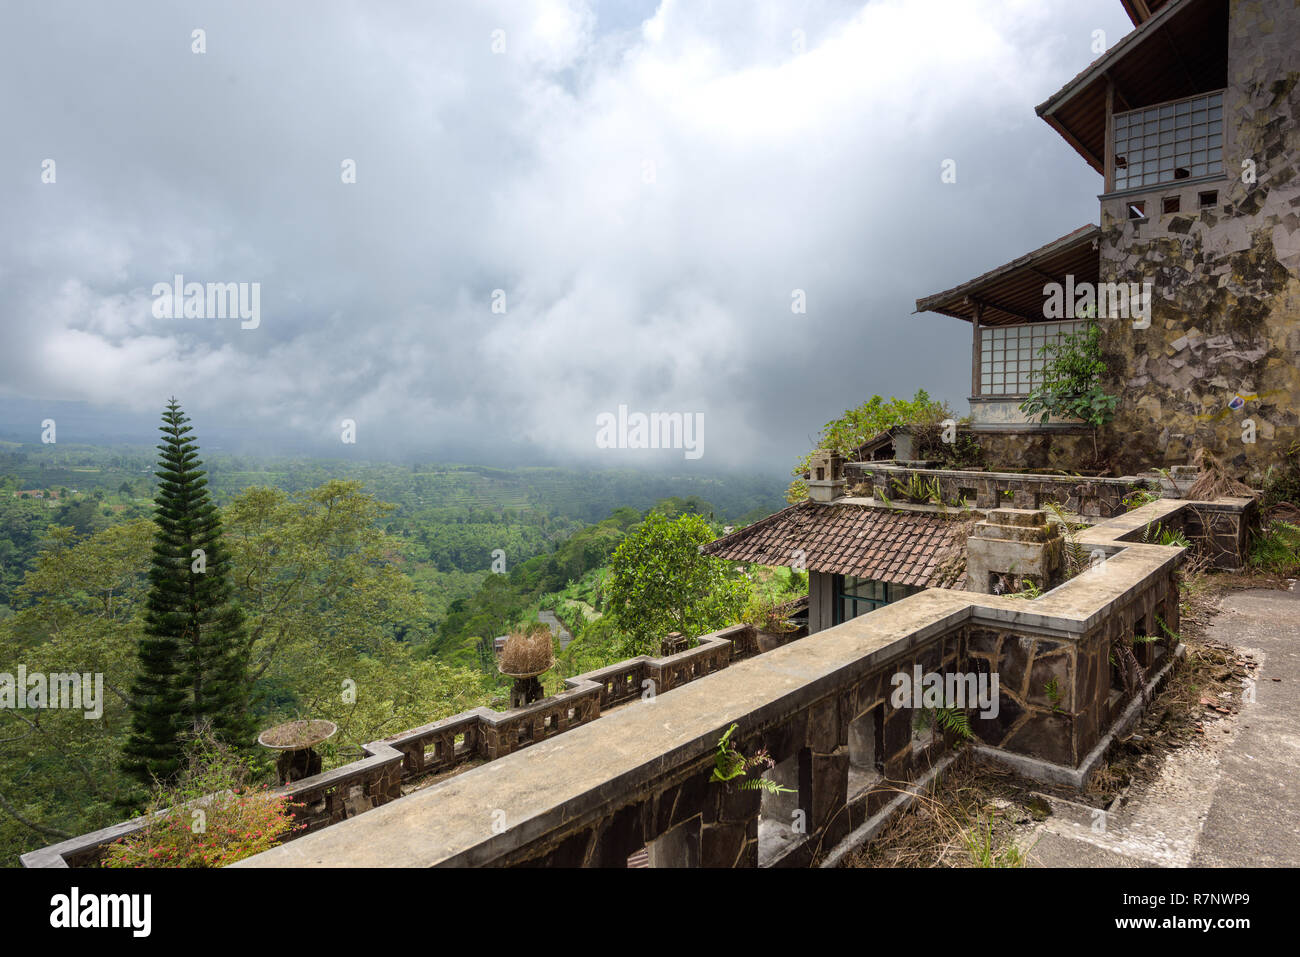 Bali, Indonesia - 22 Nov 2018: PI Bedugul Taman Rekreasi Hotel & Resort is  an large abandoned structure in Bedugul, today a tourist attraction in Bali  Stock Photo - Alamy